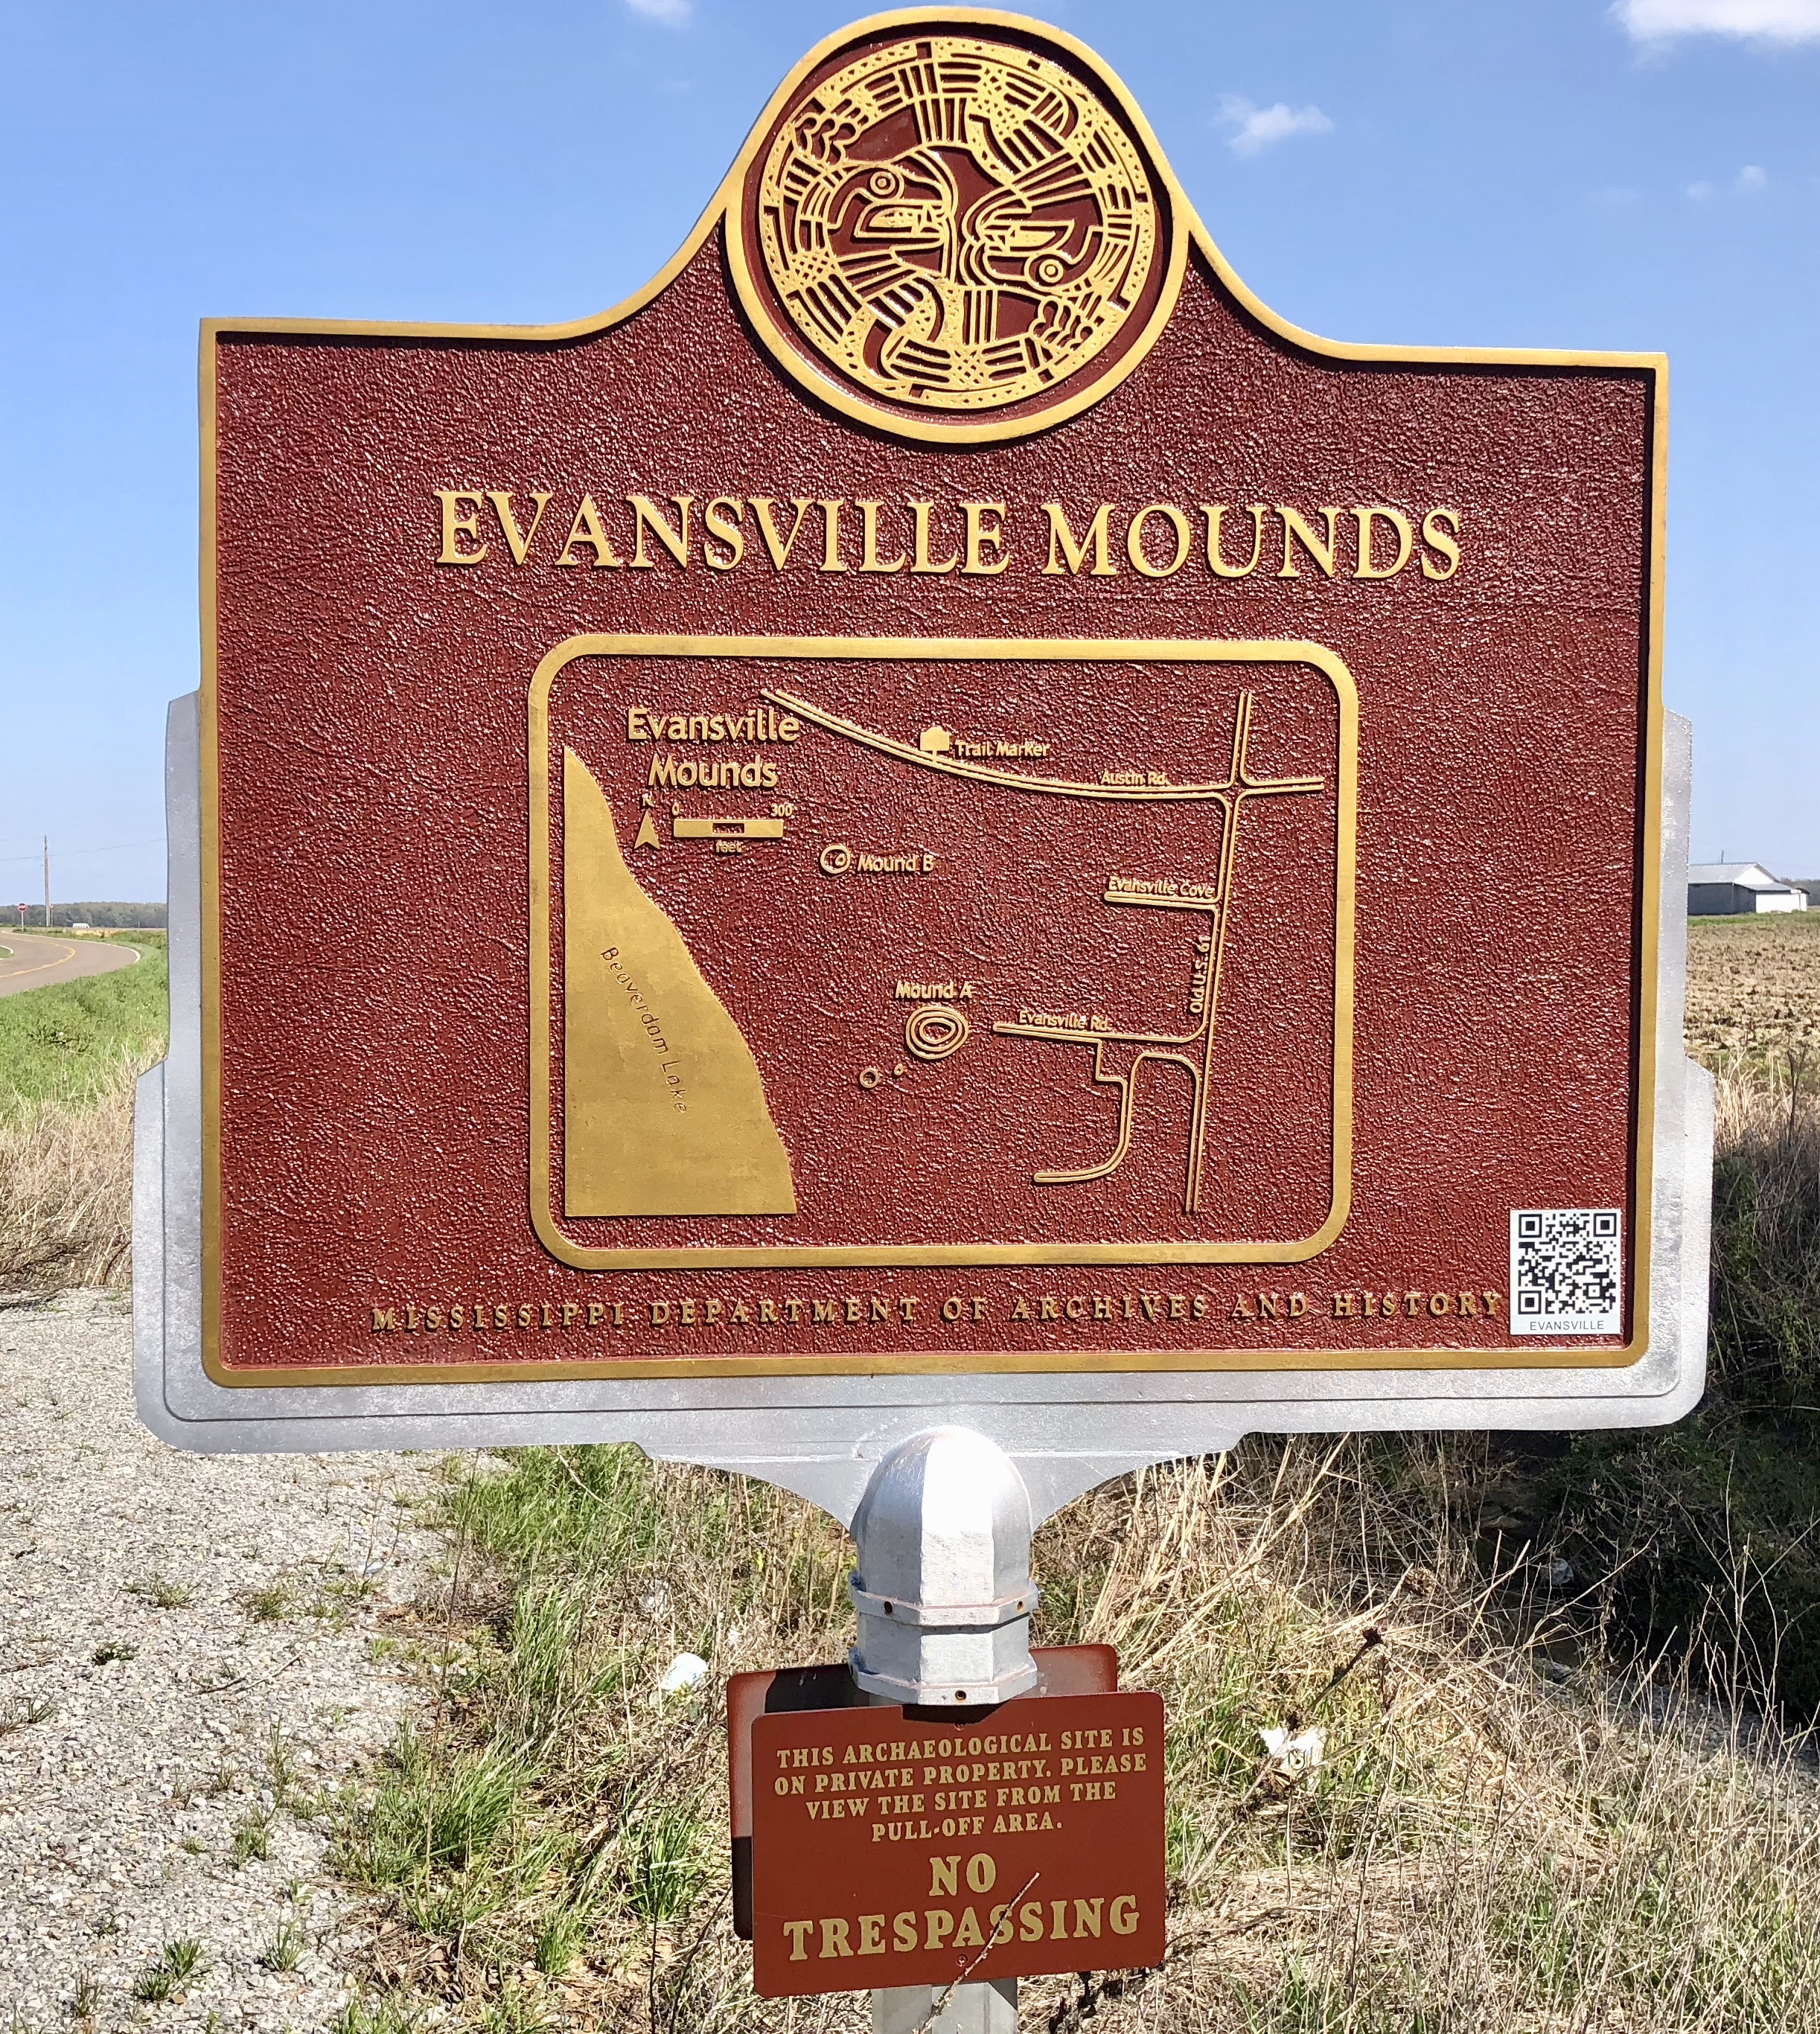 Rear of marker showing the layout of the mounds.